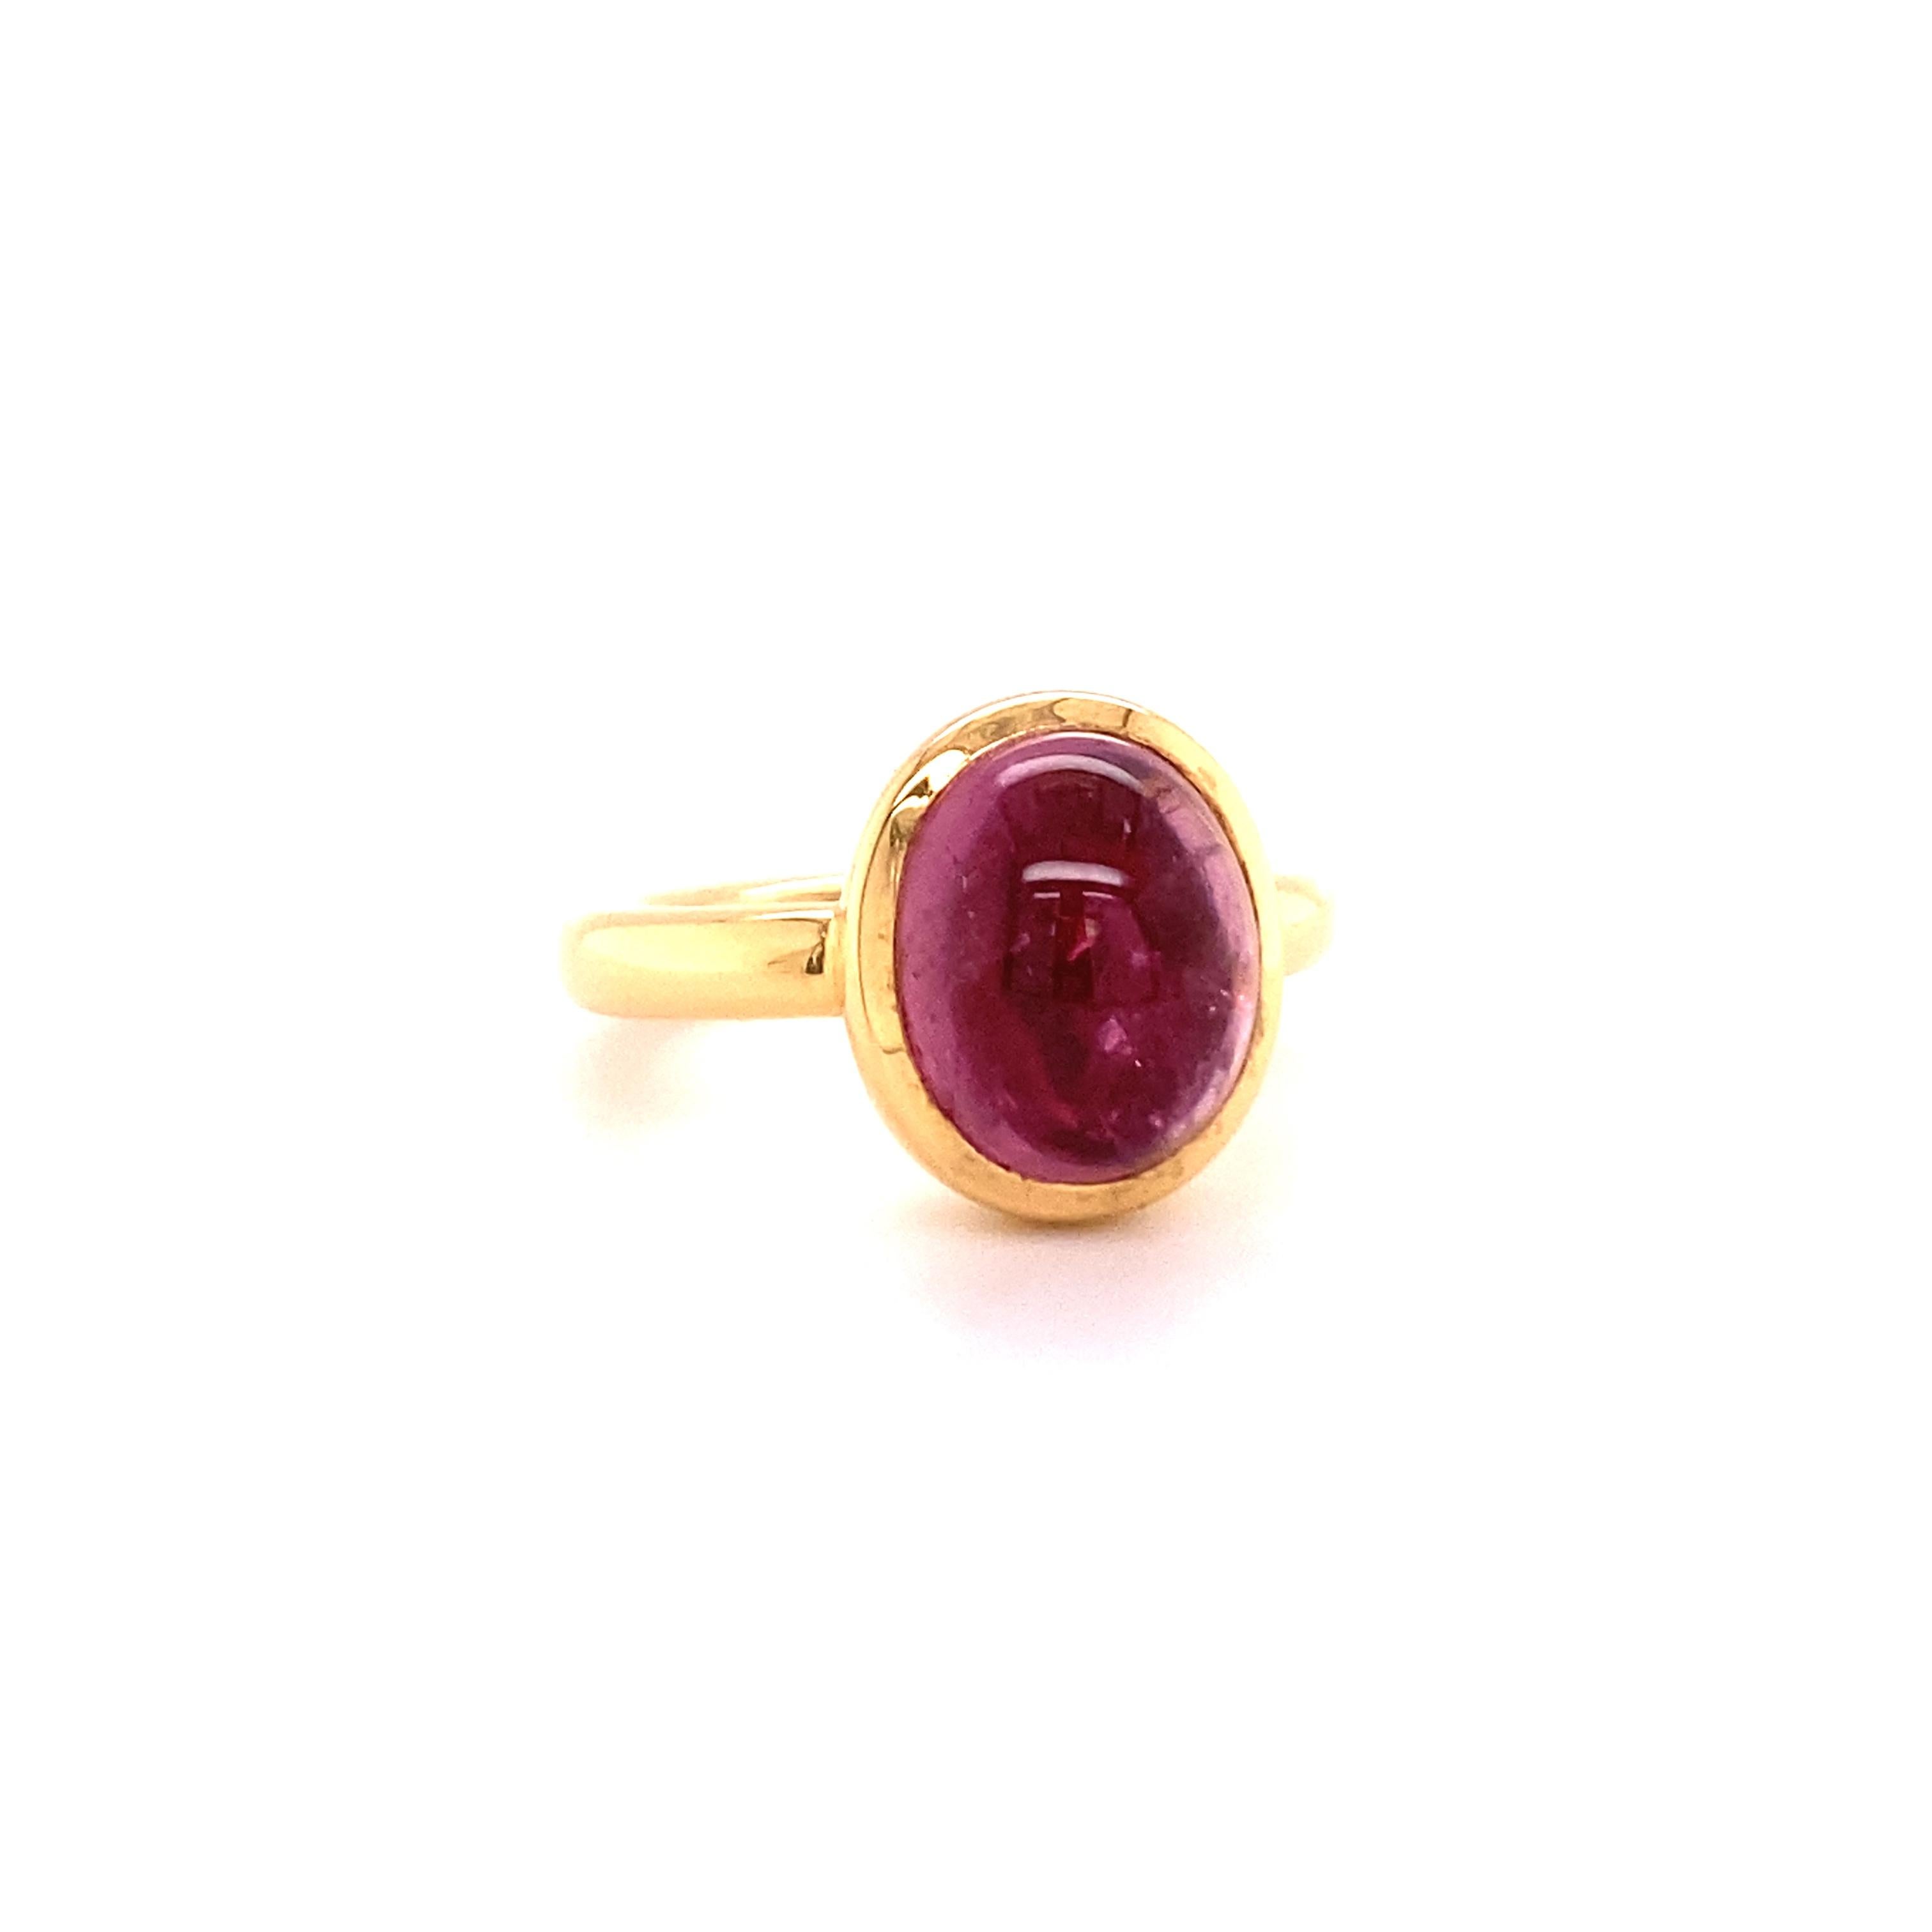 This beautifully handcrafted ring in 18 karat rose gold features a 6.31 carat cabochon cut pink tourmaline.
Bezel set in softly tinted gold, this tourmaline shows an irresistible colour. Combined with a comfortable rounded shank, this ring is simply